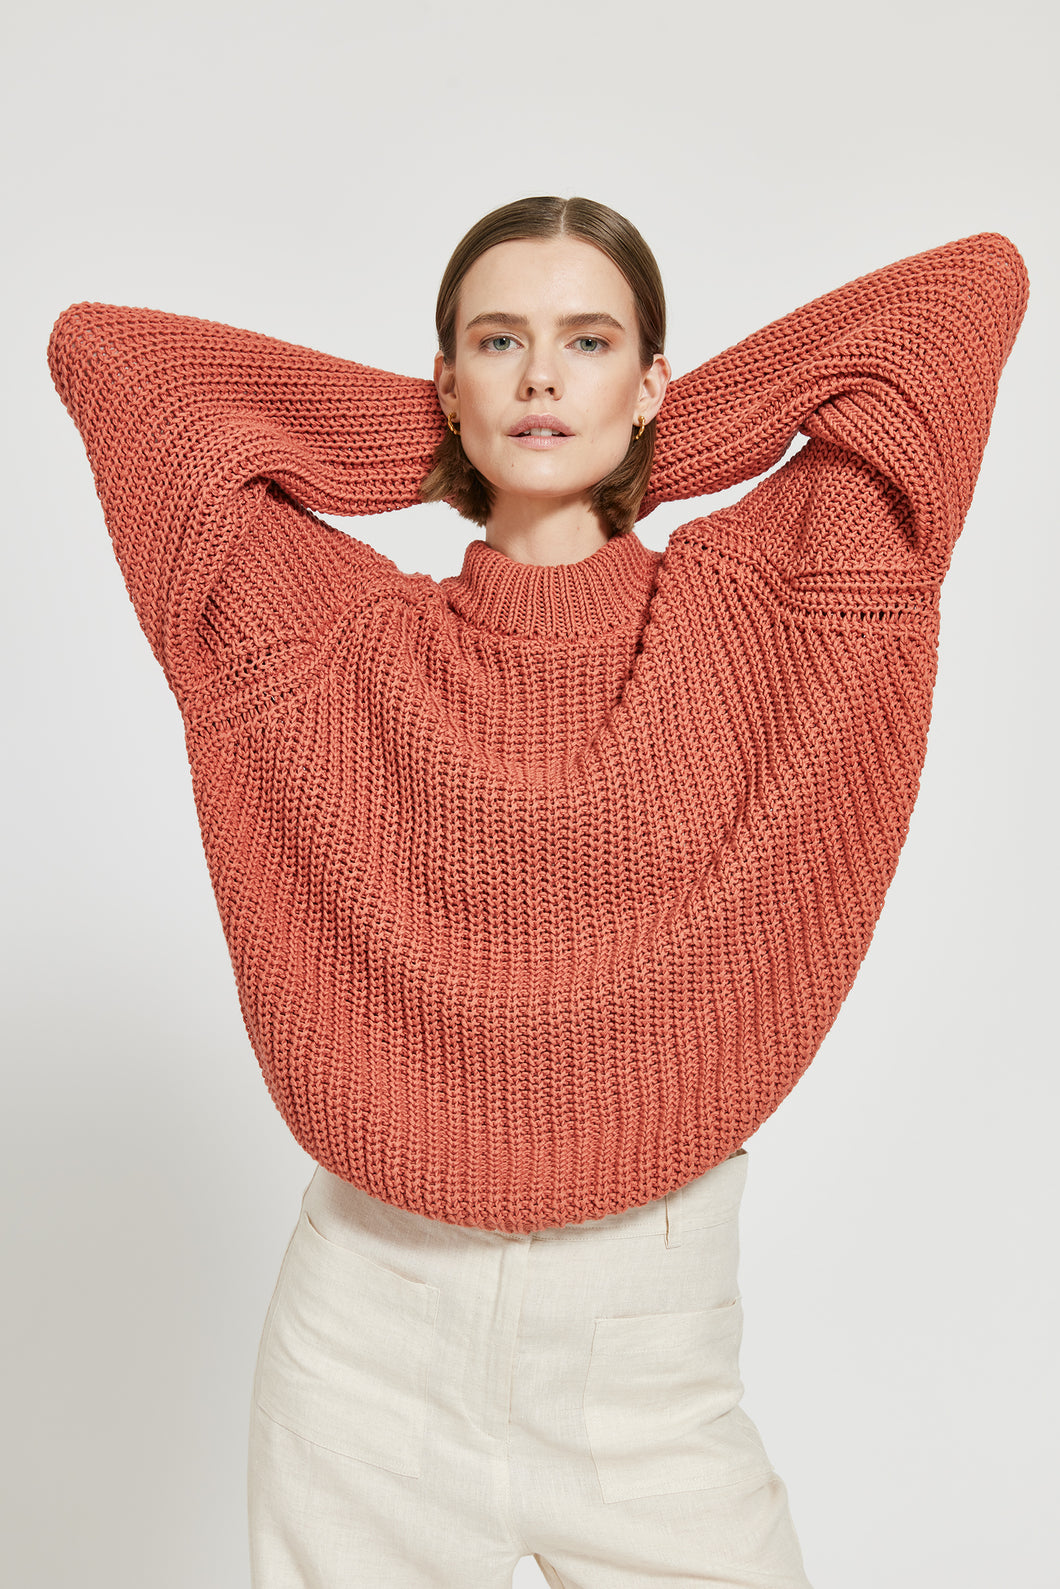 Lark - chunky cotton sweater - dusty coral